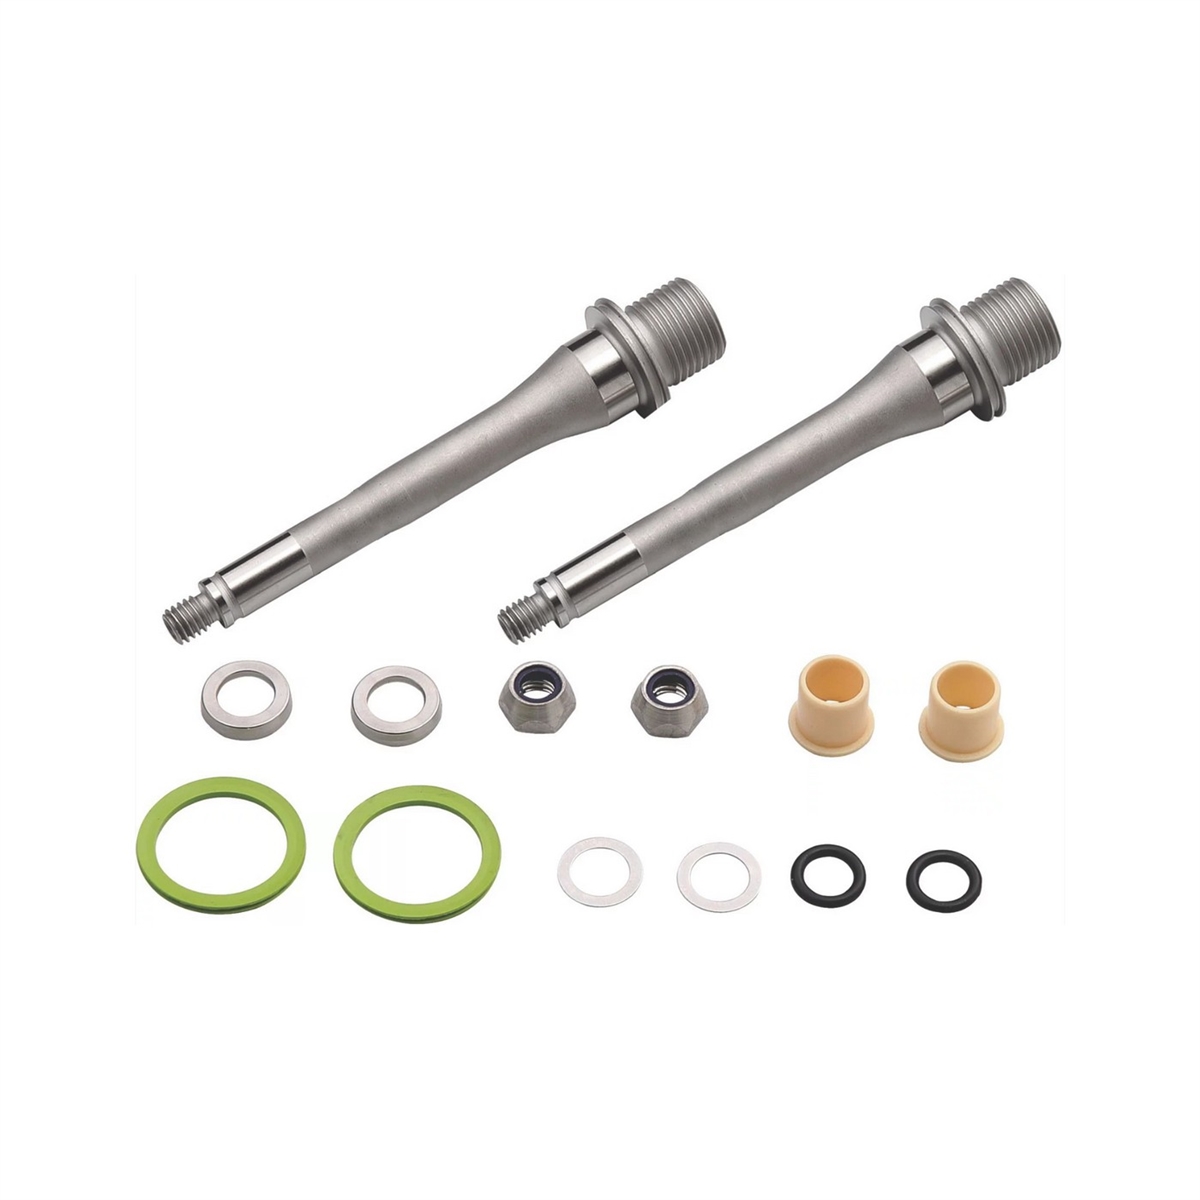 Axle spare kit for Spike and Oozy pedals from 2015